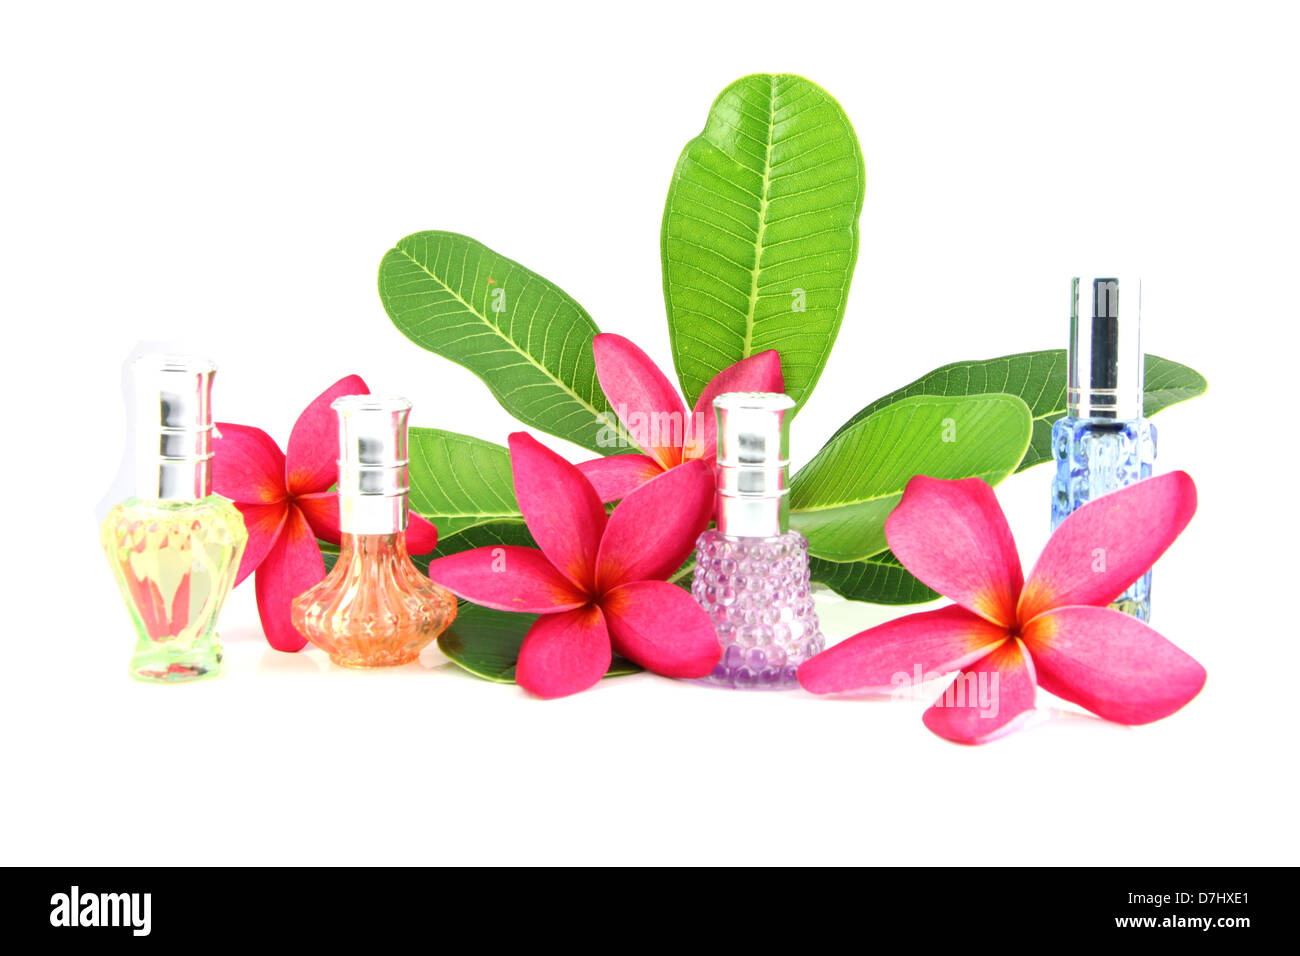 Perfume bottles many colors placed with flowers and leaves on a white background. Stock Photo